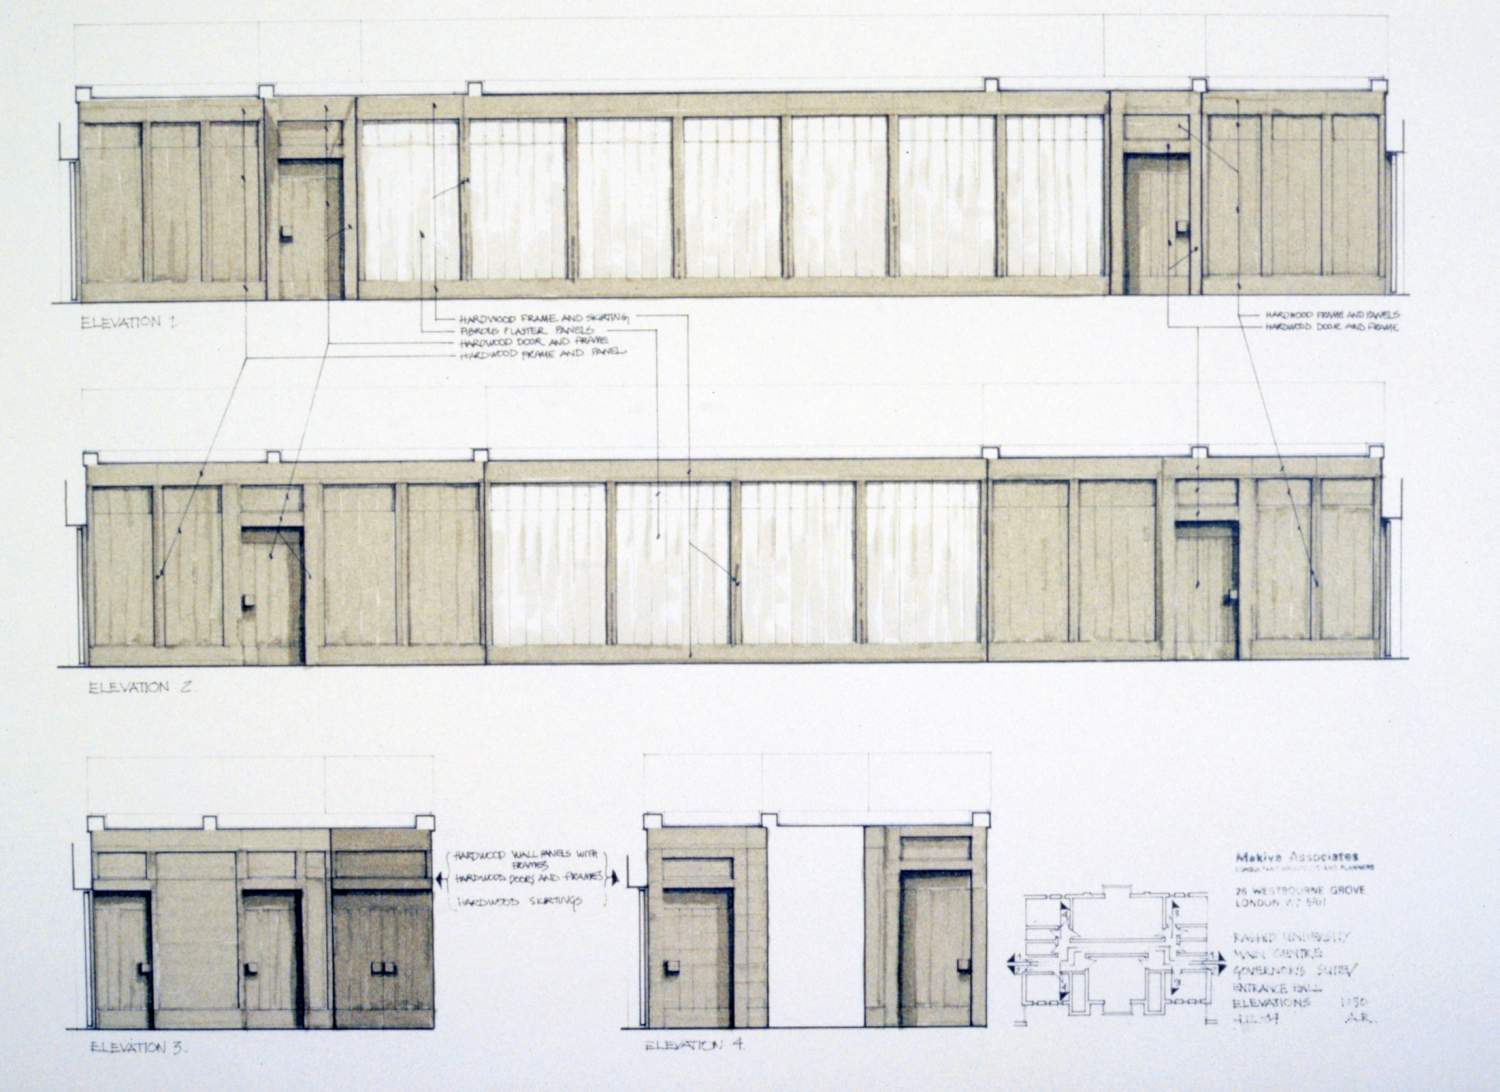 Main centre, governor's suite and entrance hall: elevations.